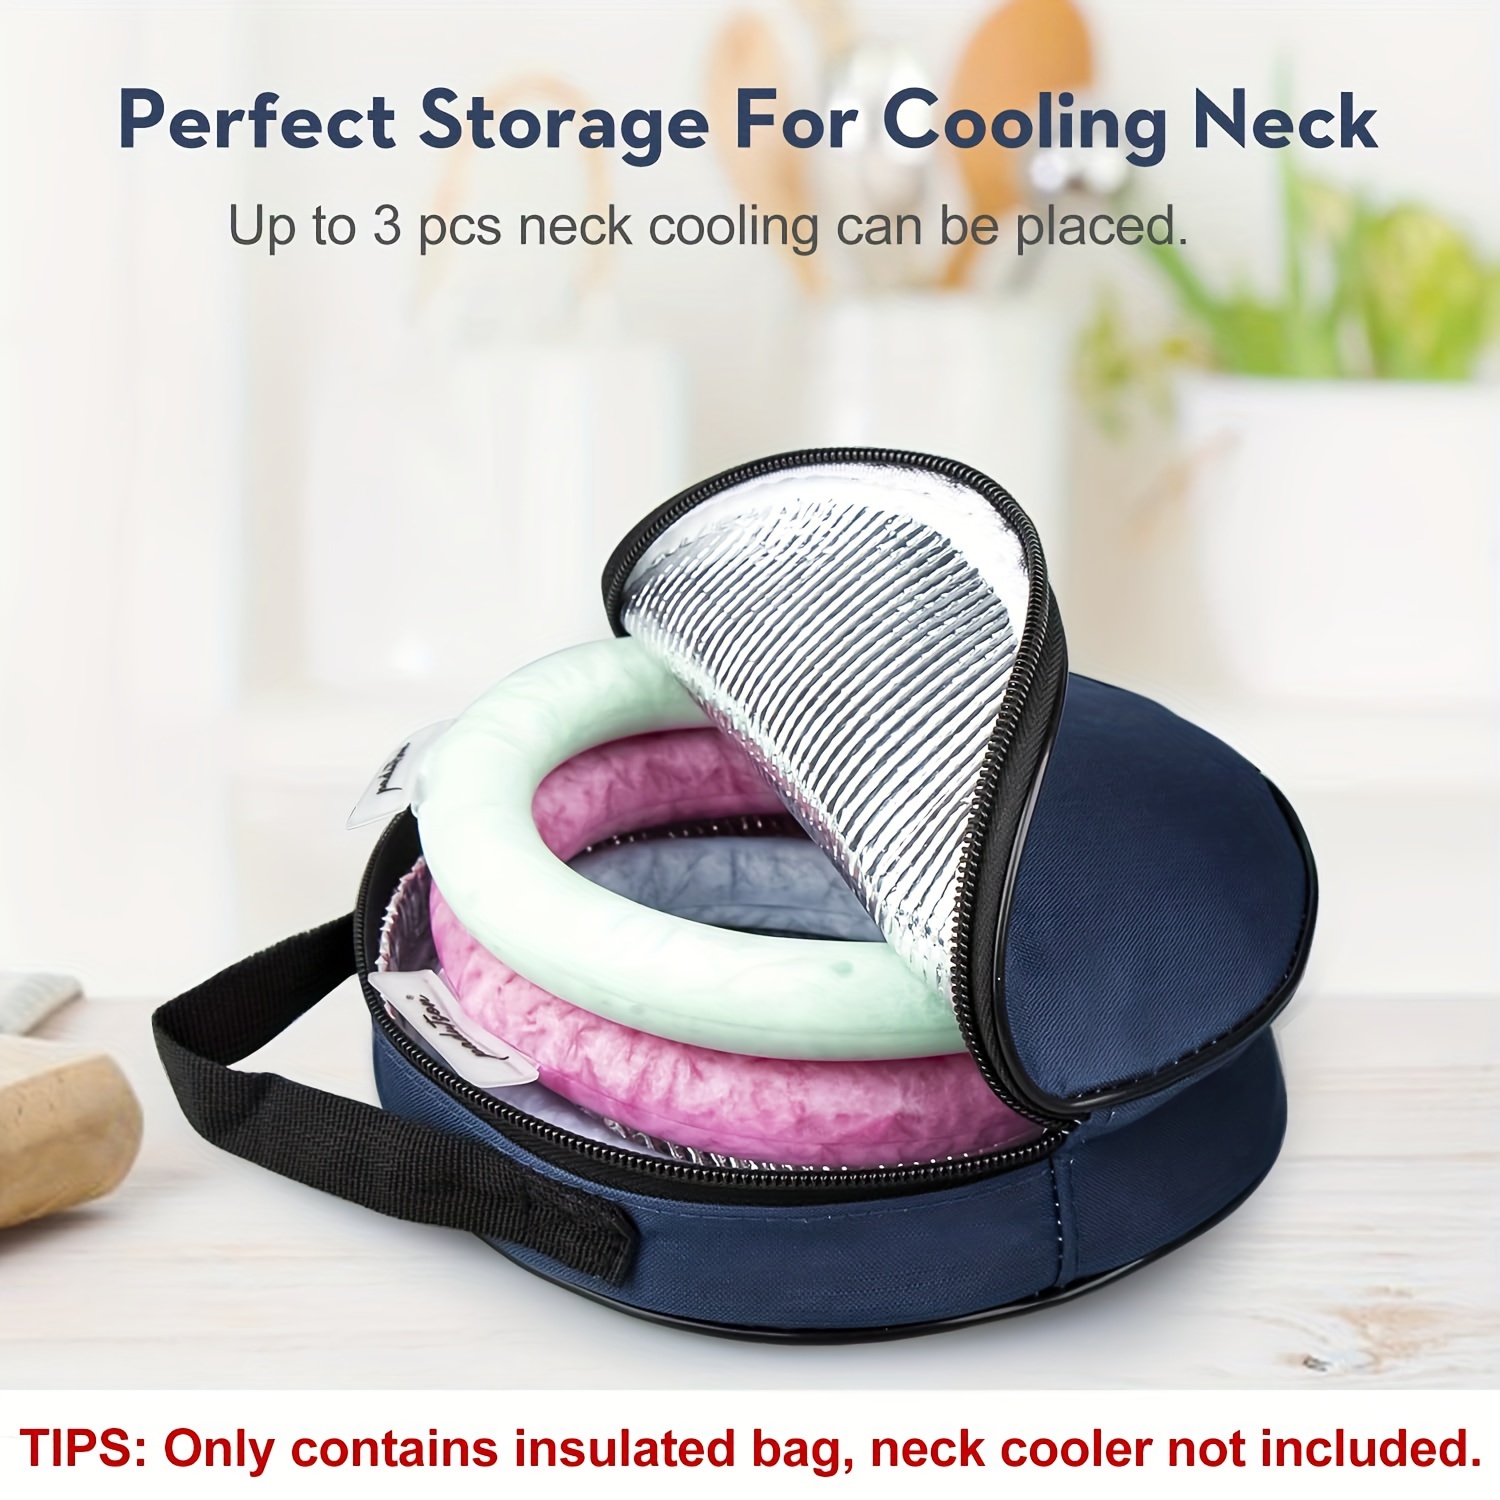 

Blue Insulated Storage Bag For Neck Cooling Devices - Adult Uncharged Thermal Cooler Case In Oxford Cloth, Battery-free Cooling Accessory Extender